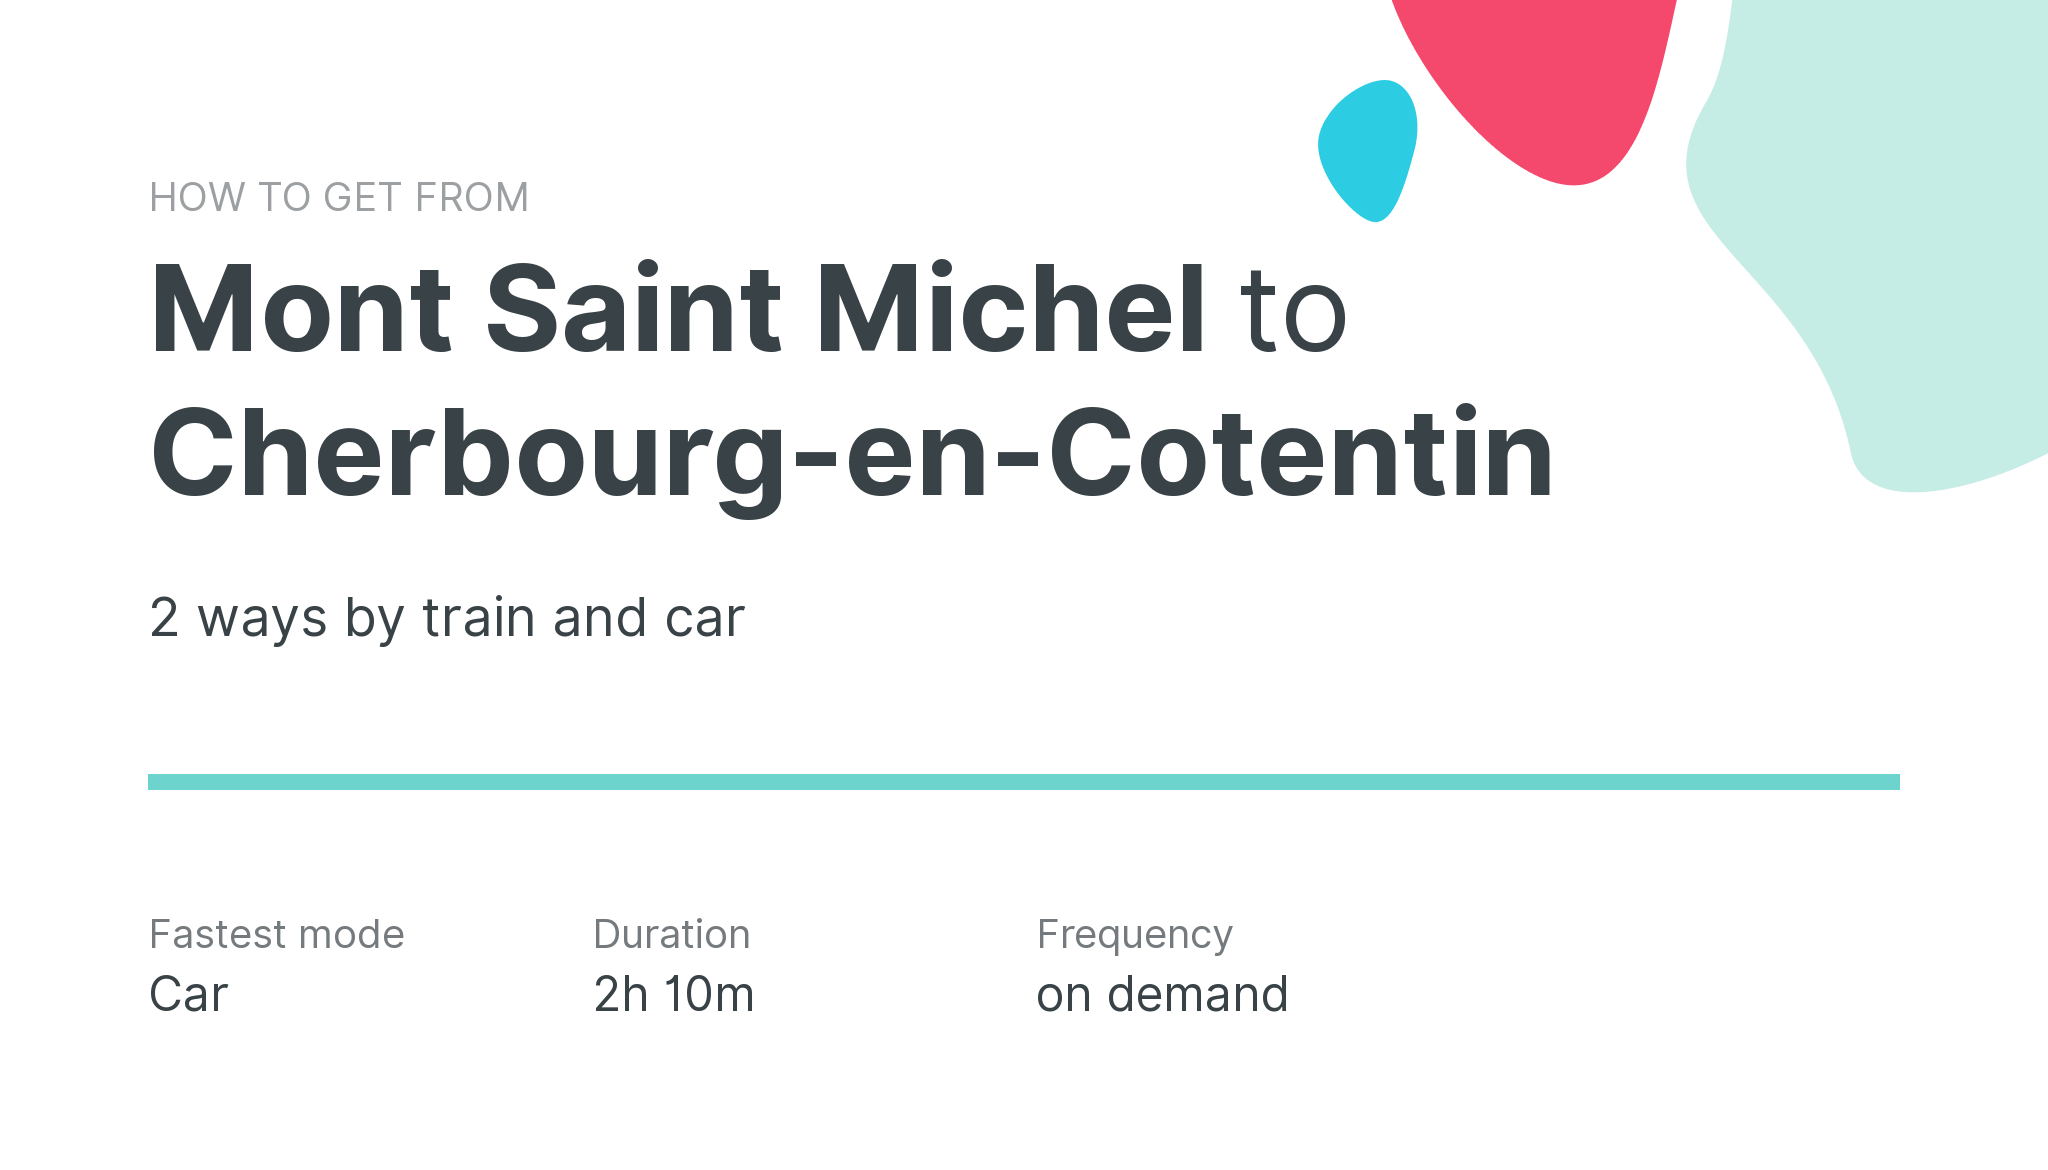 How do I get from Mont Saint Michel to Cherbourg-en-Cotentin